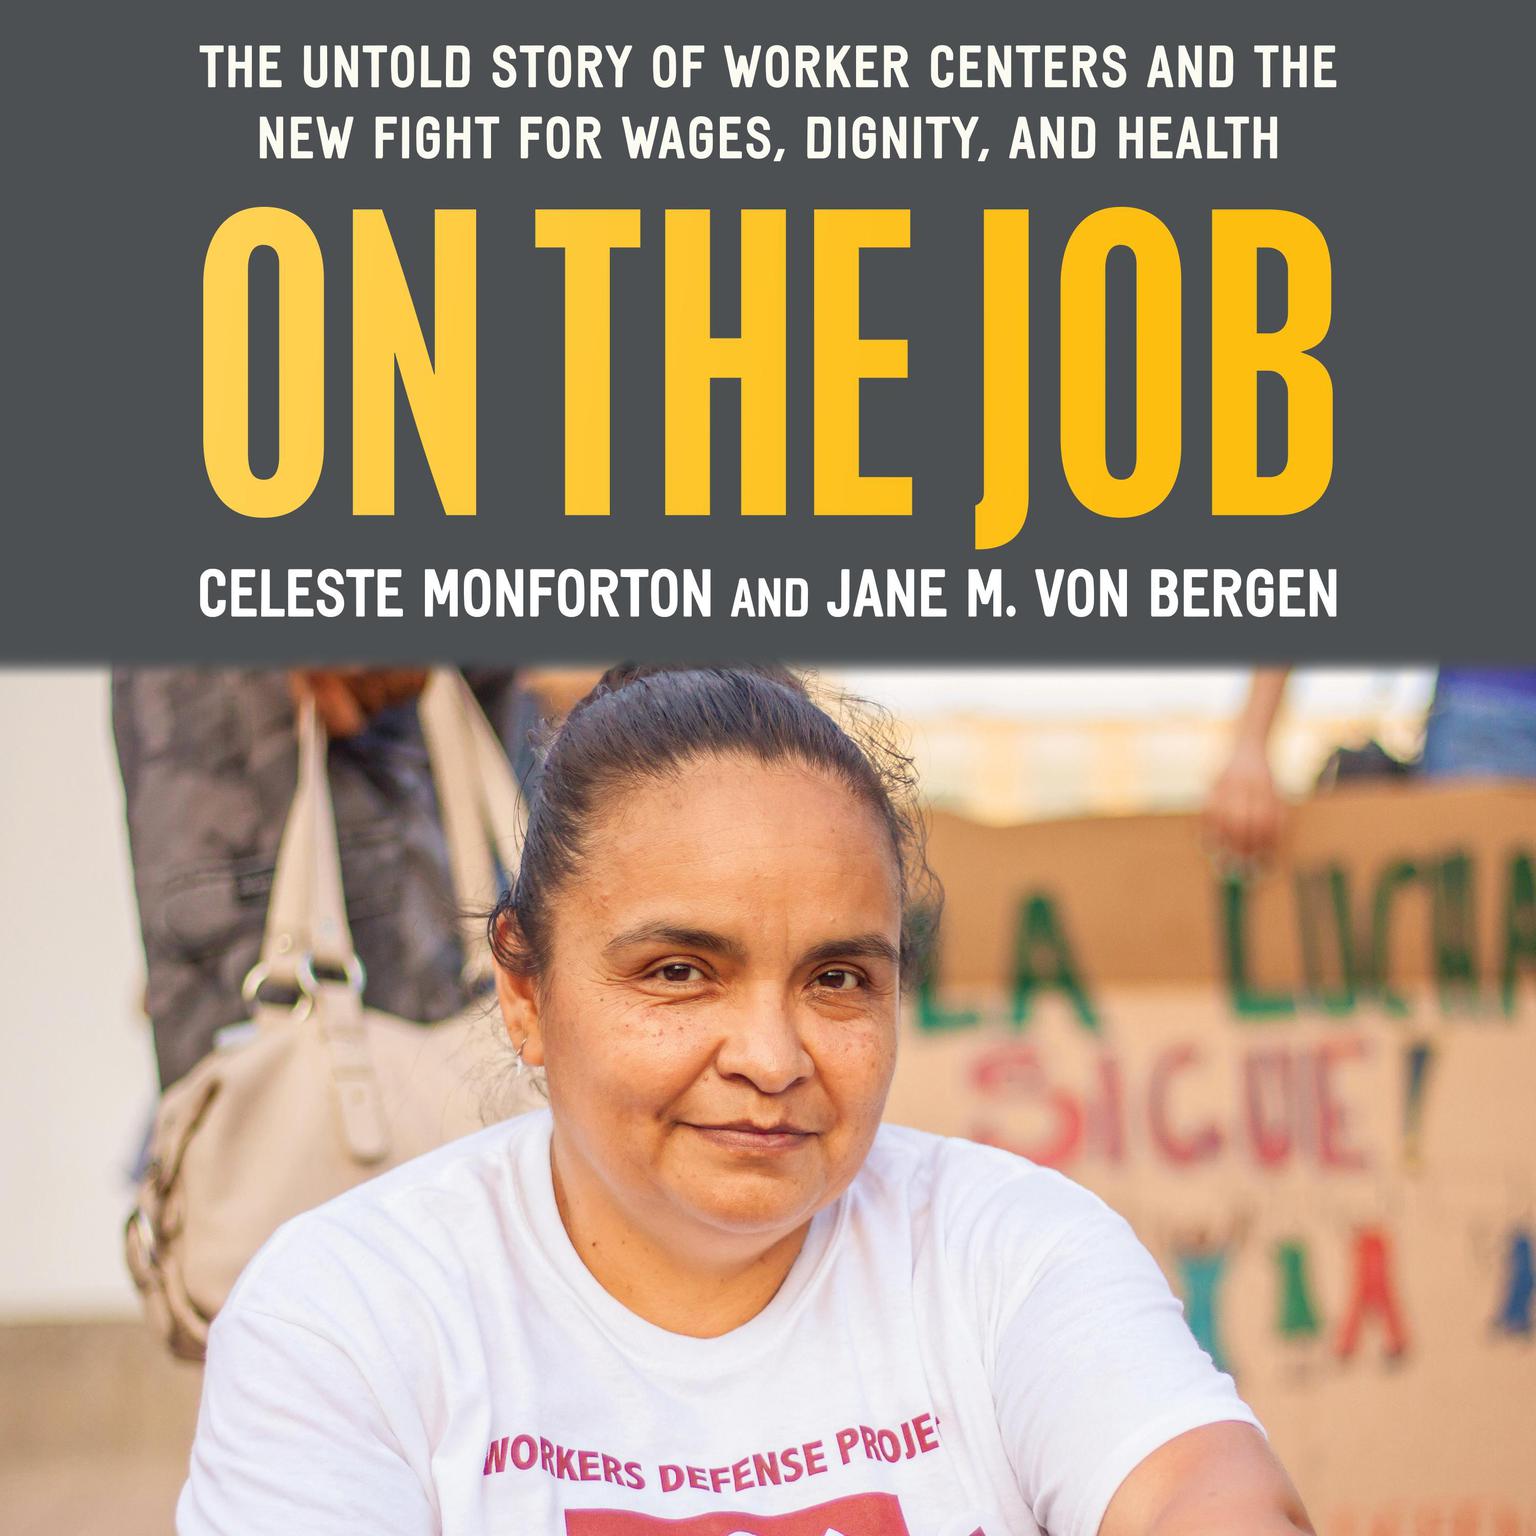 On the Job: The Untold Story of America’s Worker Centers and the New Fight for Wages, Dignity, and Health Audiobook, by Celeste Monforton